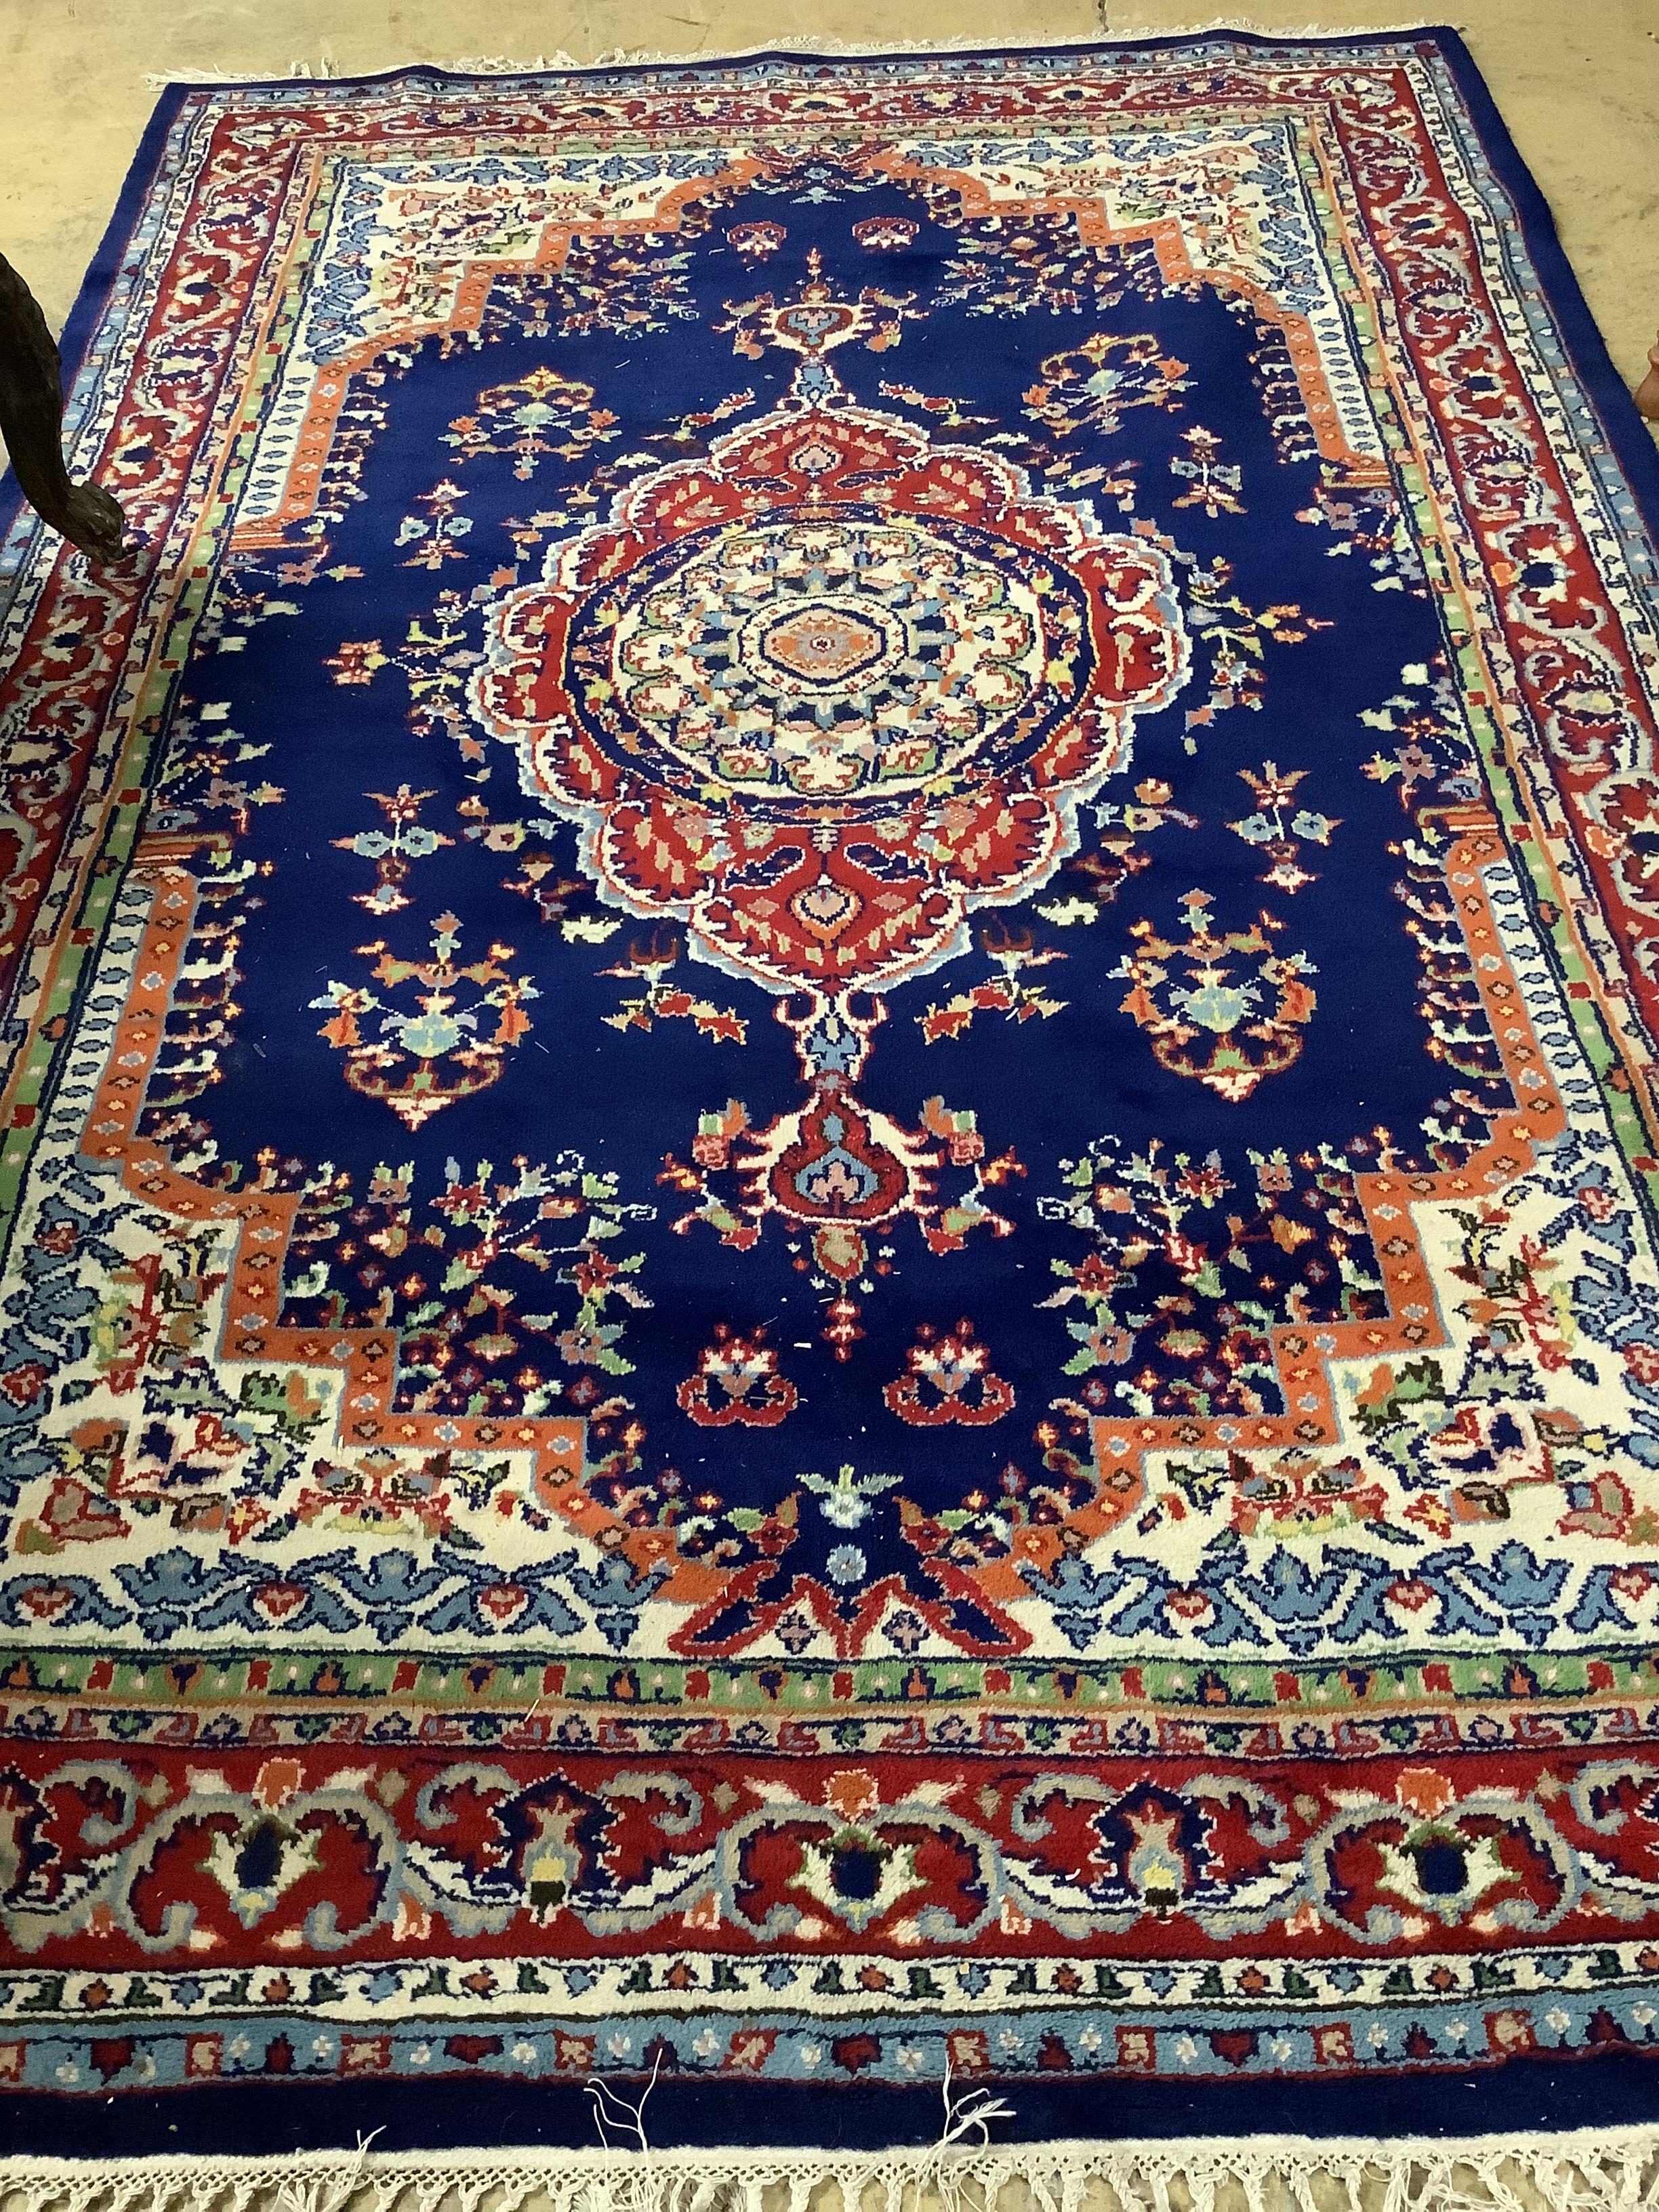 A North West Persian style blue ground carpet, 260 x 180cm